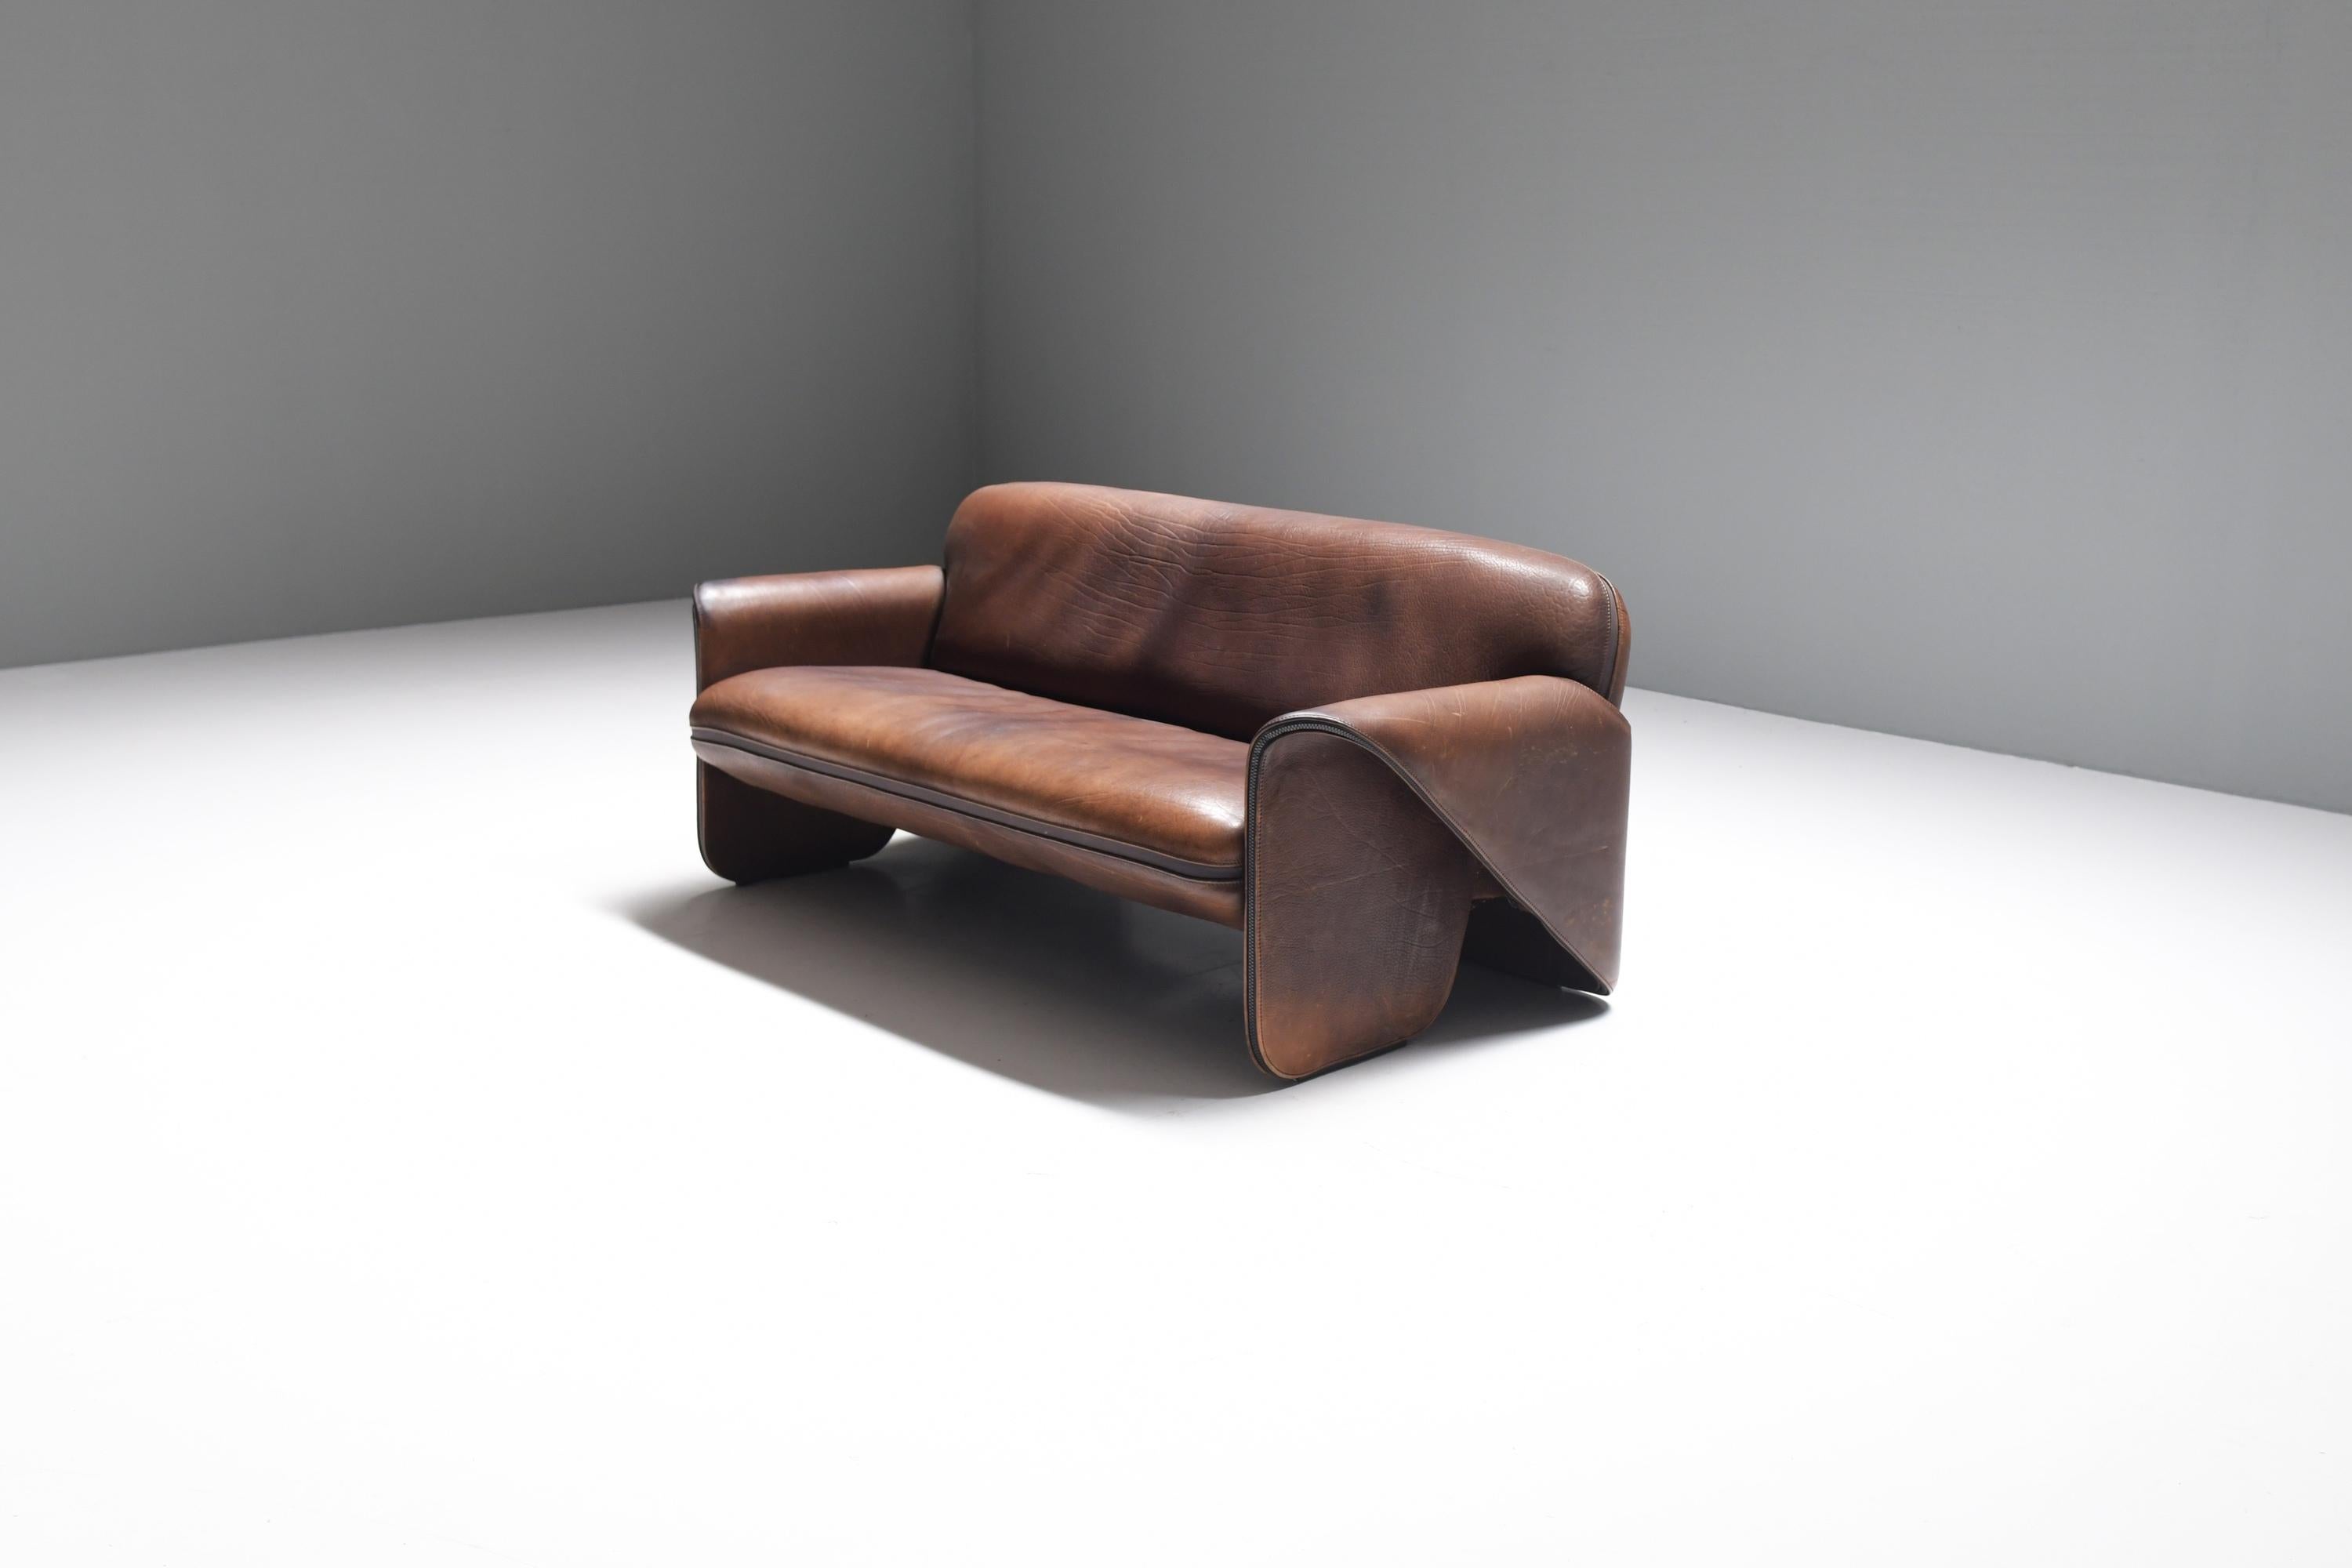 Stylish DS-125 sofa in his original thick brown buffalo leather! What a patina!
Designed by Gerd Lange for De Sede in 1970

The sculptural design in combination with the high quality leather gives the sofa a very royal & luxurious feeling.  Easy to